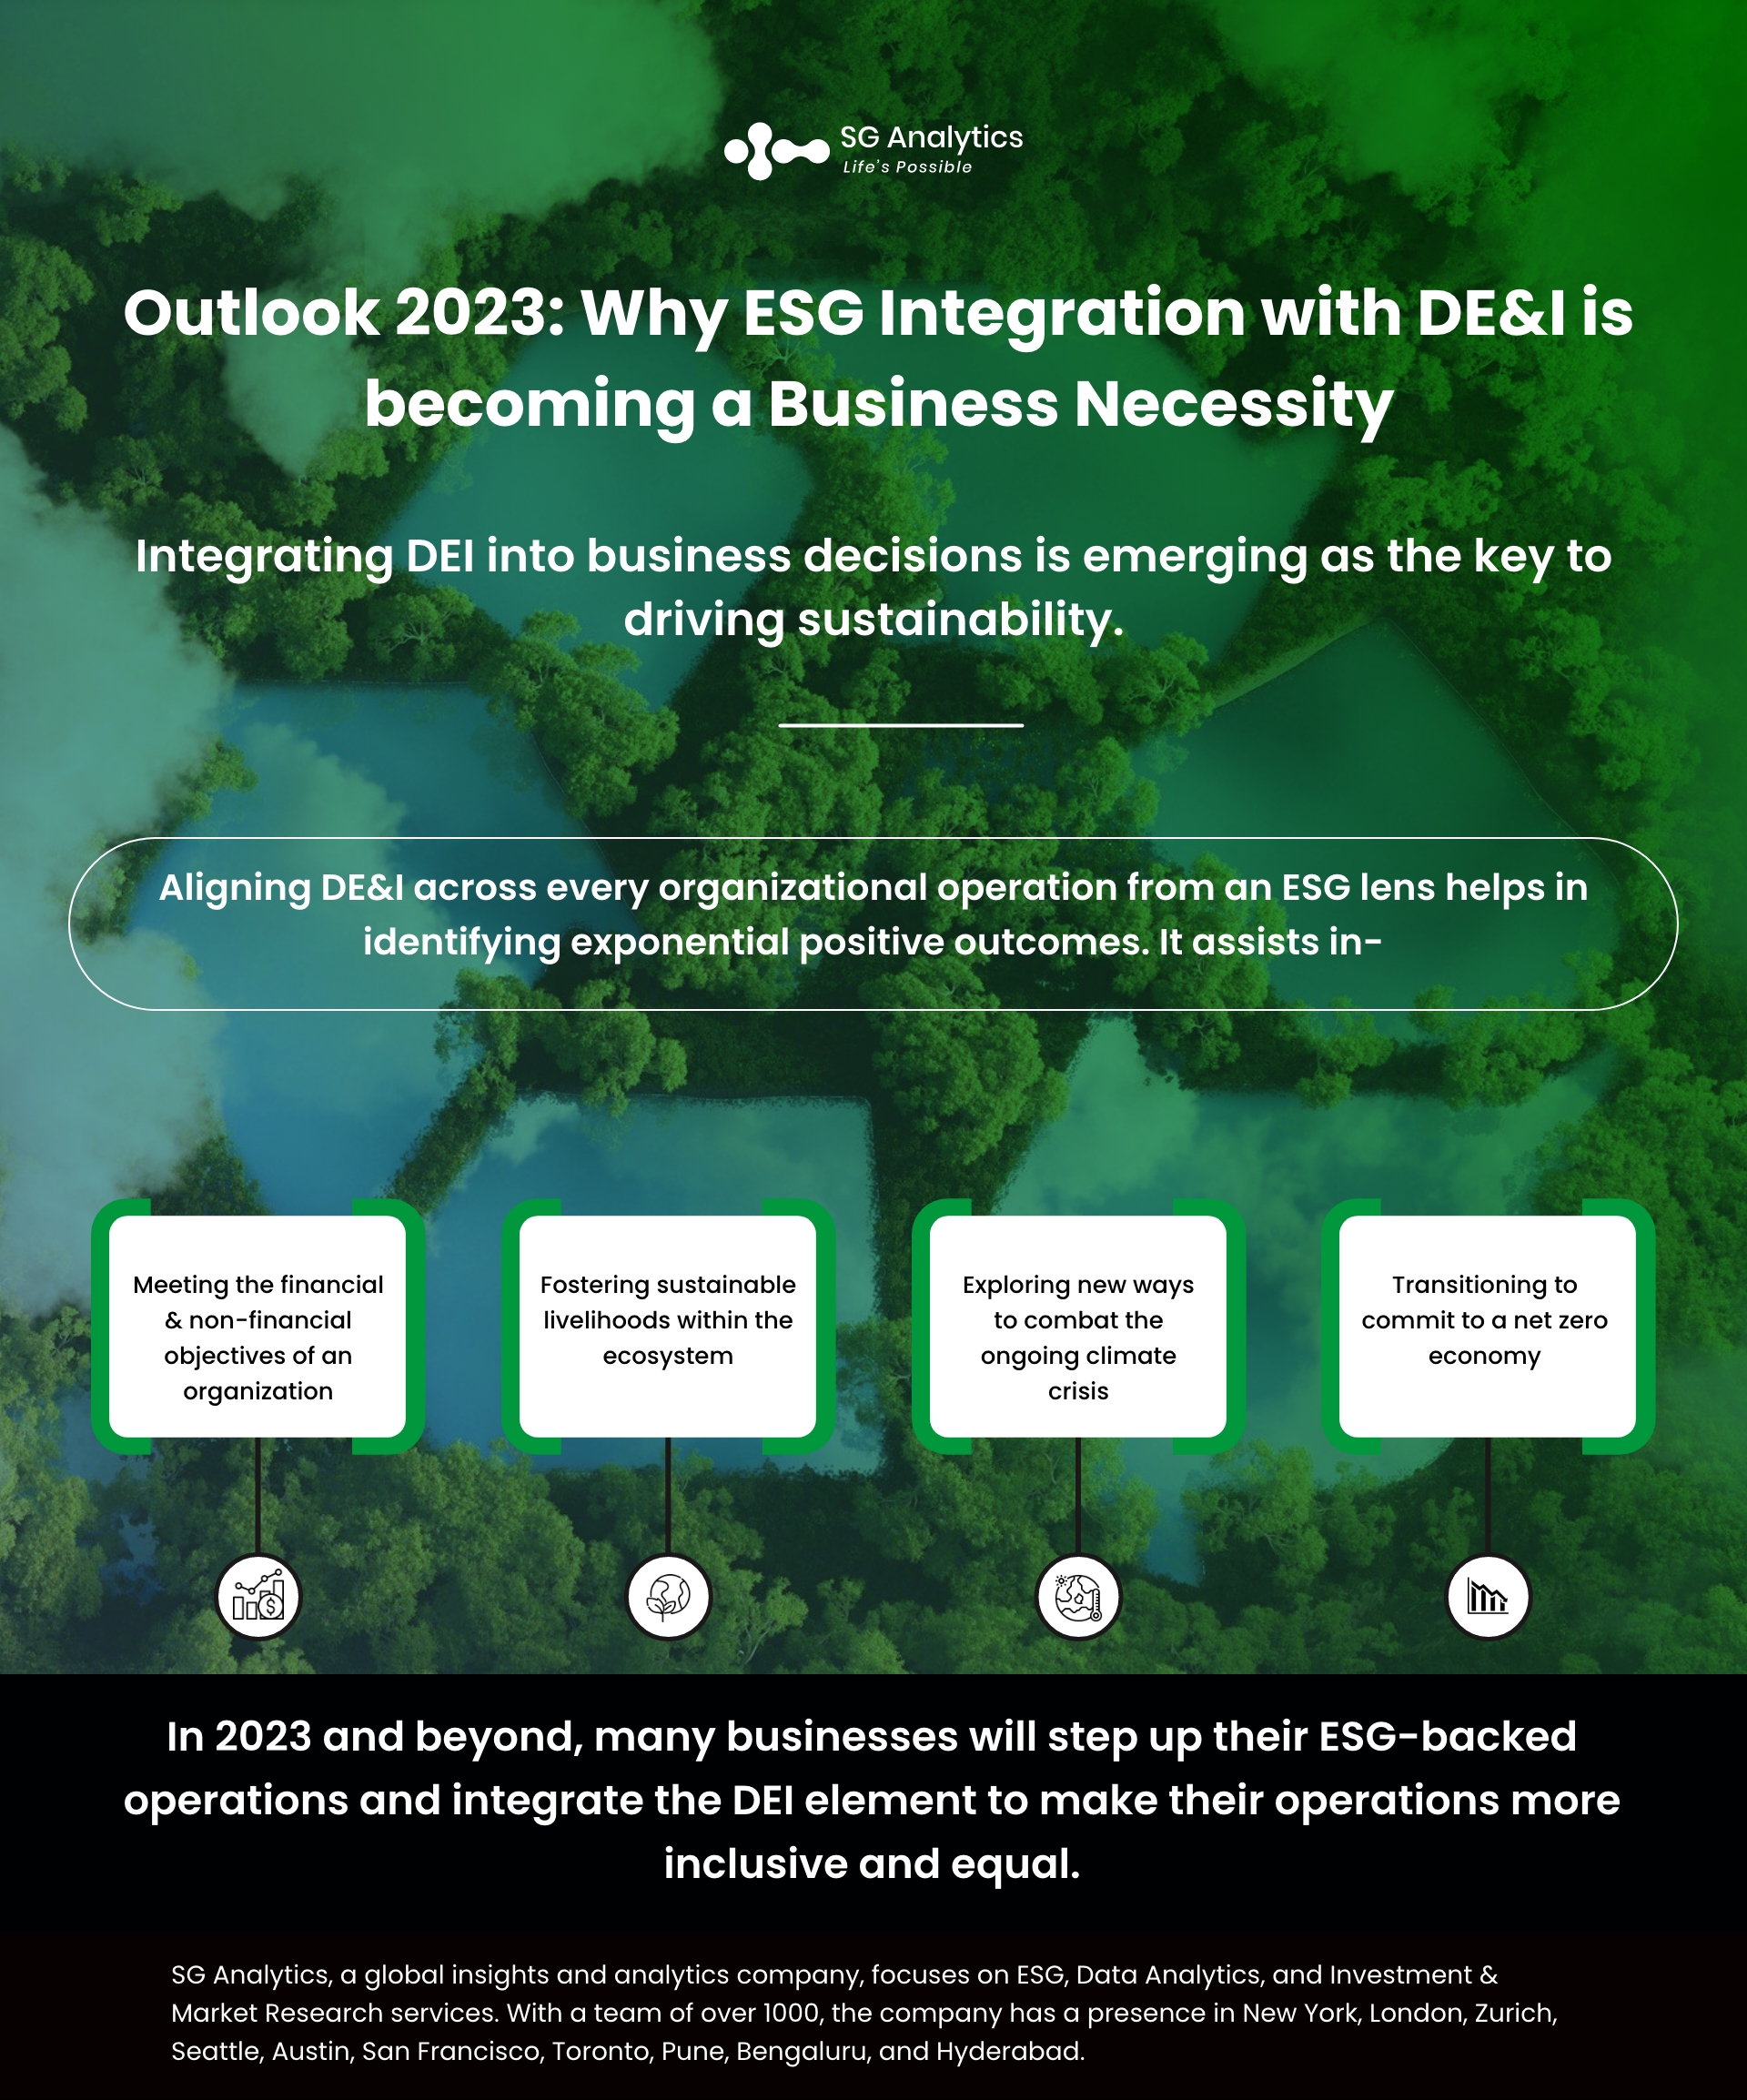 Why ESG Integration with DE&I is becoming a Business Necessity 